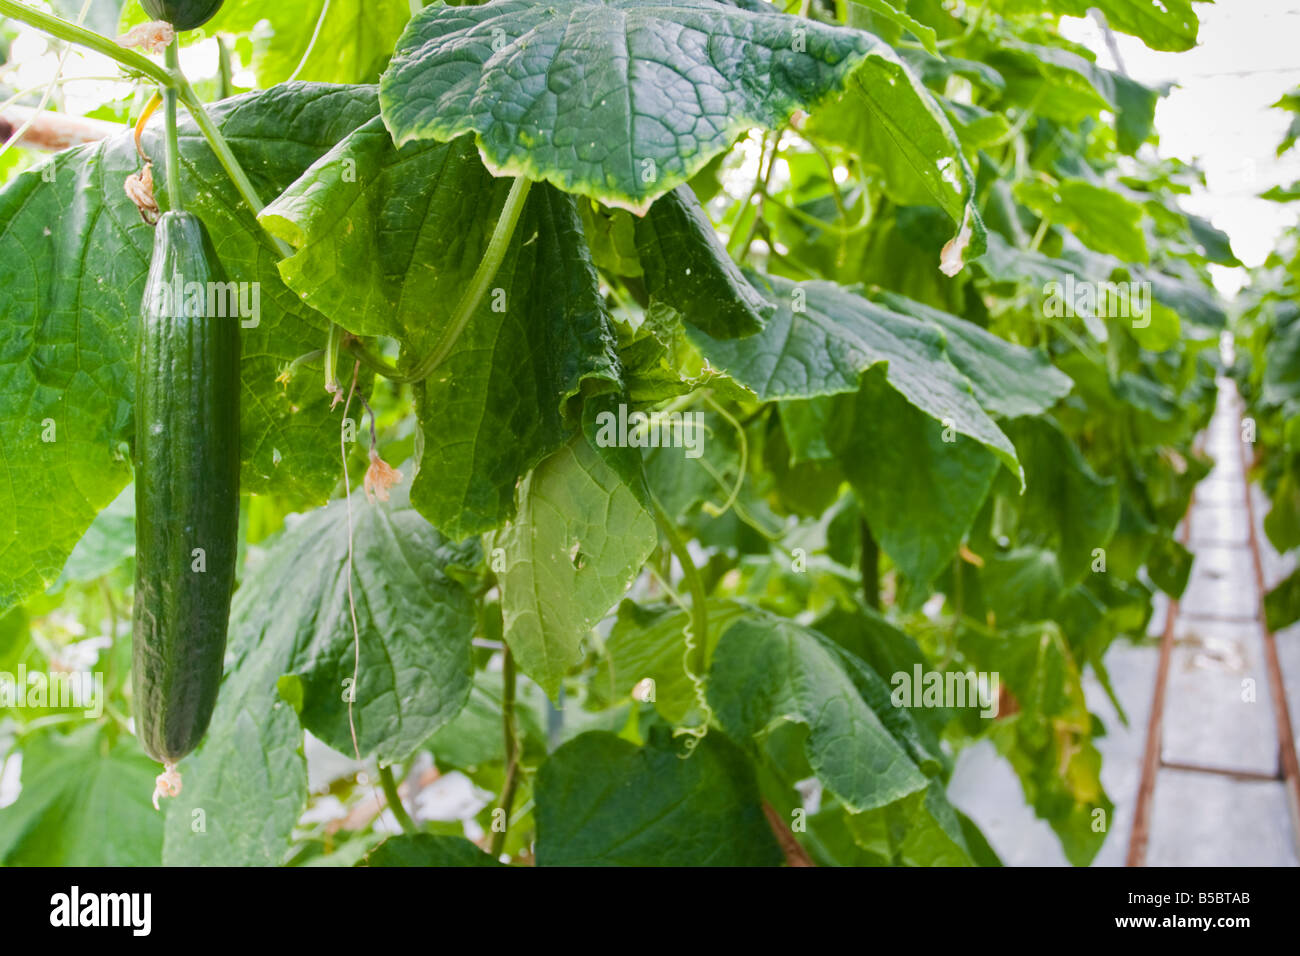 Growing English Cucumber, Cucumis Sativus, in a greenhouse Stock Photo